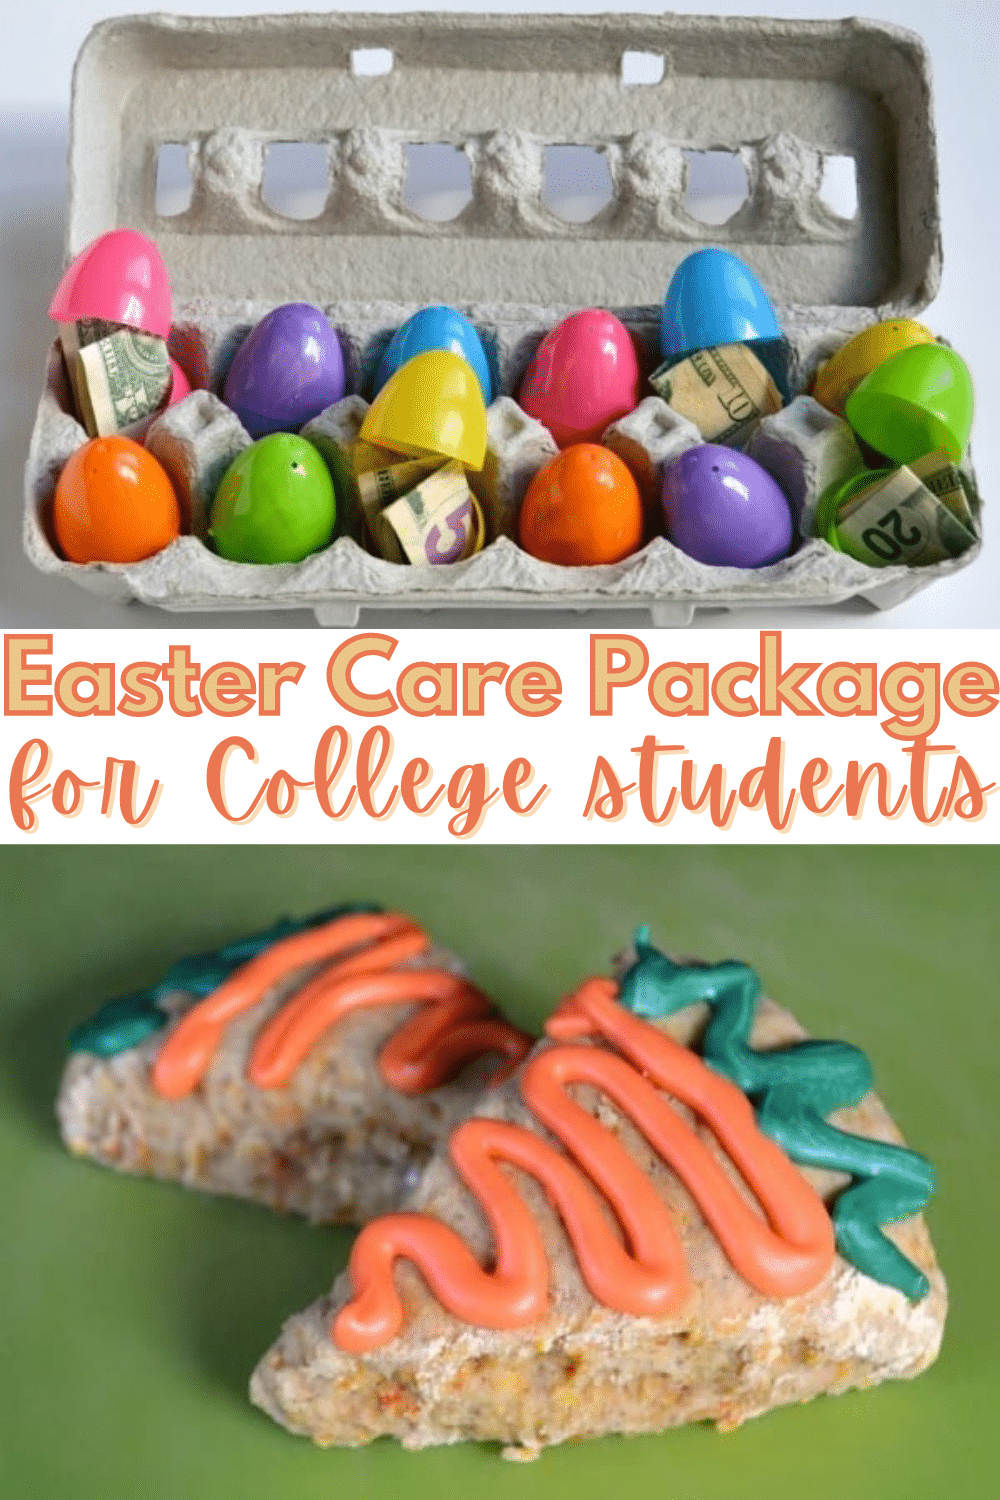 Here are some ideas for items to include in an Easter and Spring themed care package to celebrate the season for college students. #easter #carepackage #spring #collegestudent via @wondermomwannab